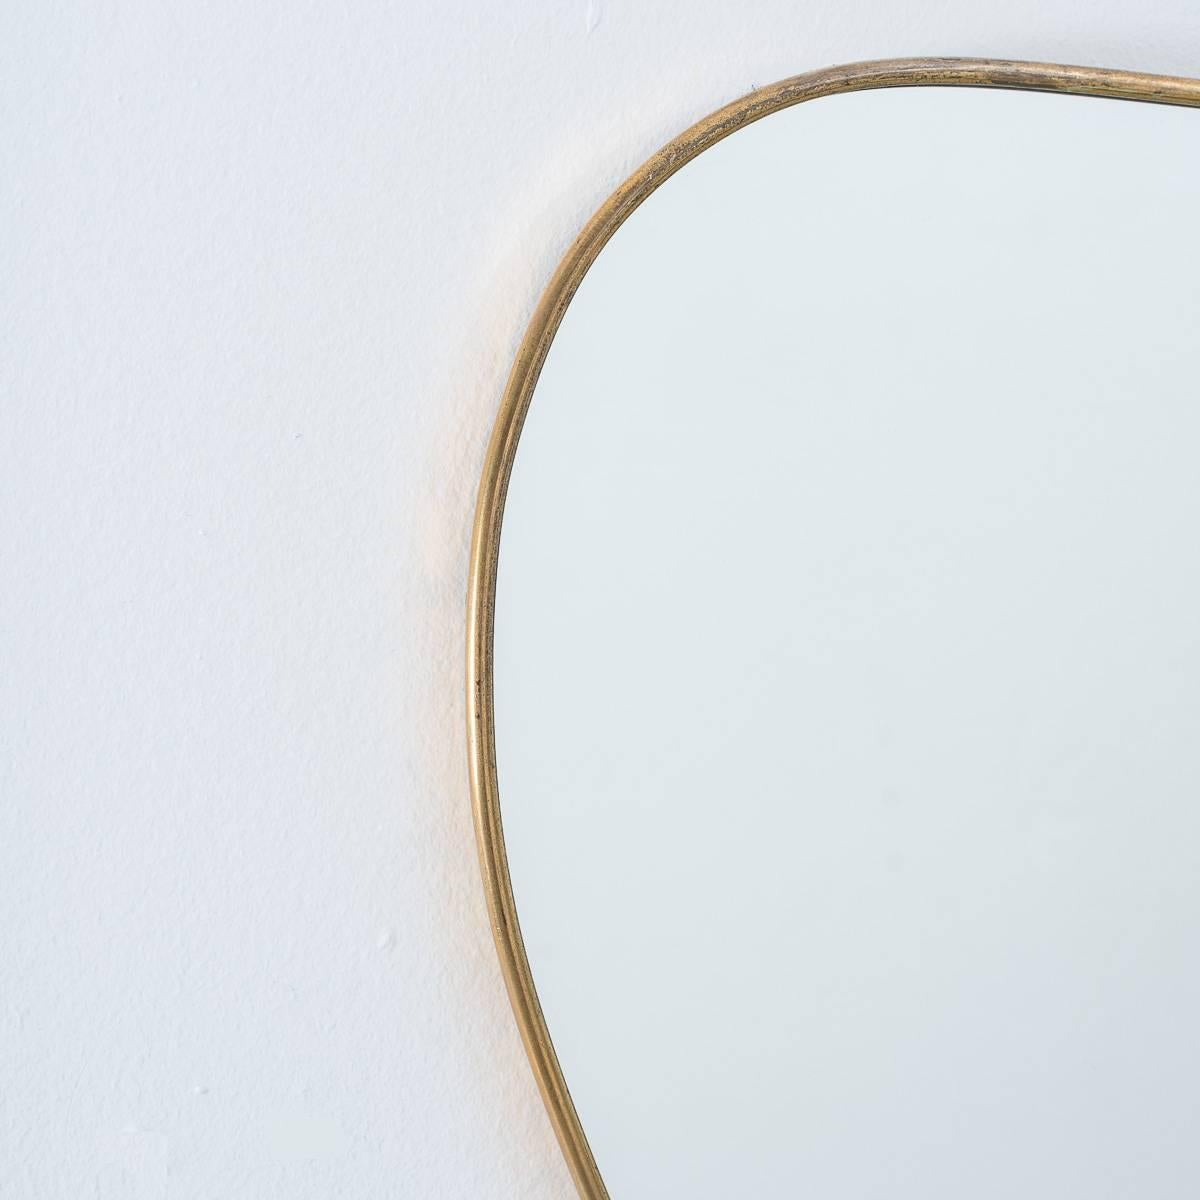 This quirky little mirror harks back to the well-known examples produced by Gio Ponti. Our mirror of a similar age to the Gio Ponti ones however, has a more free-form shape to it. It has a smooth brass surround frame, solid wooden backing and metal